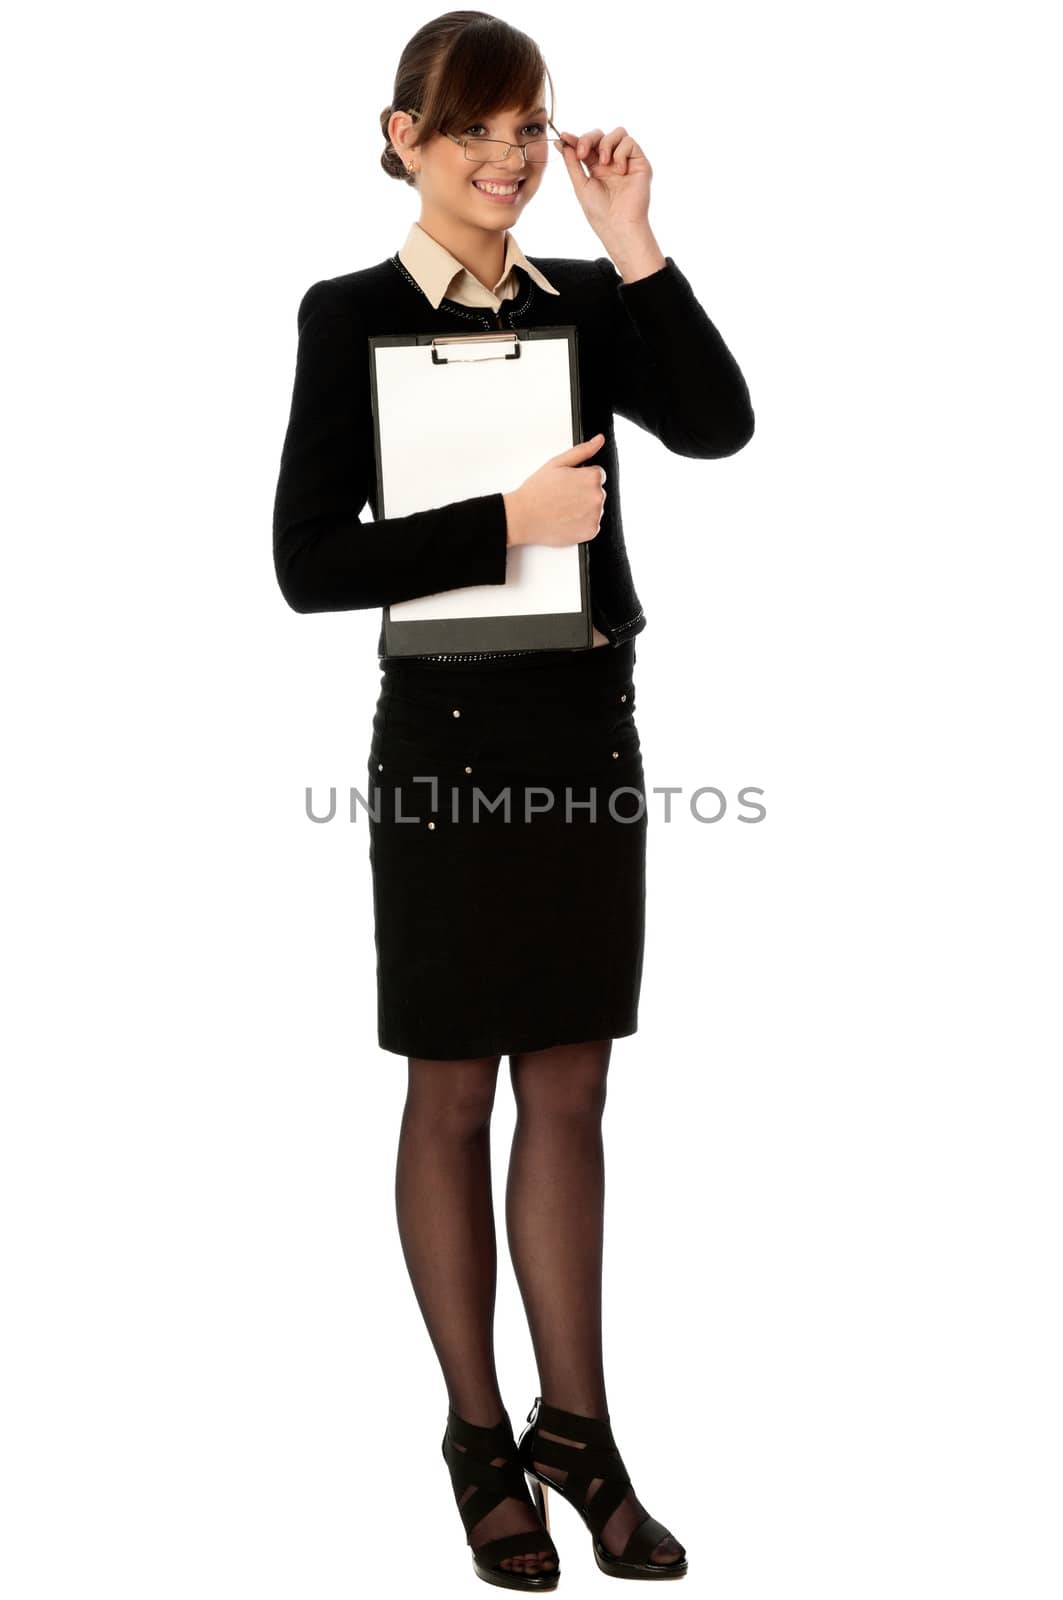 The manager with white blank paper in the hands making a presentation